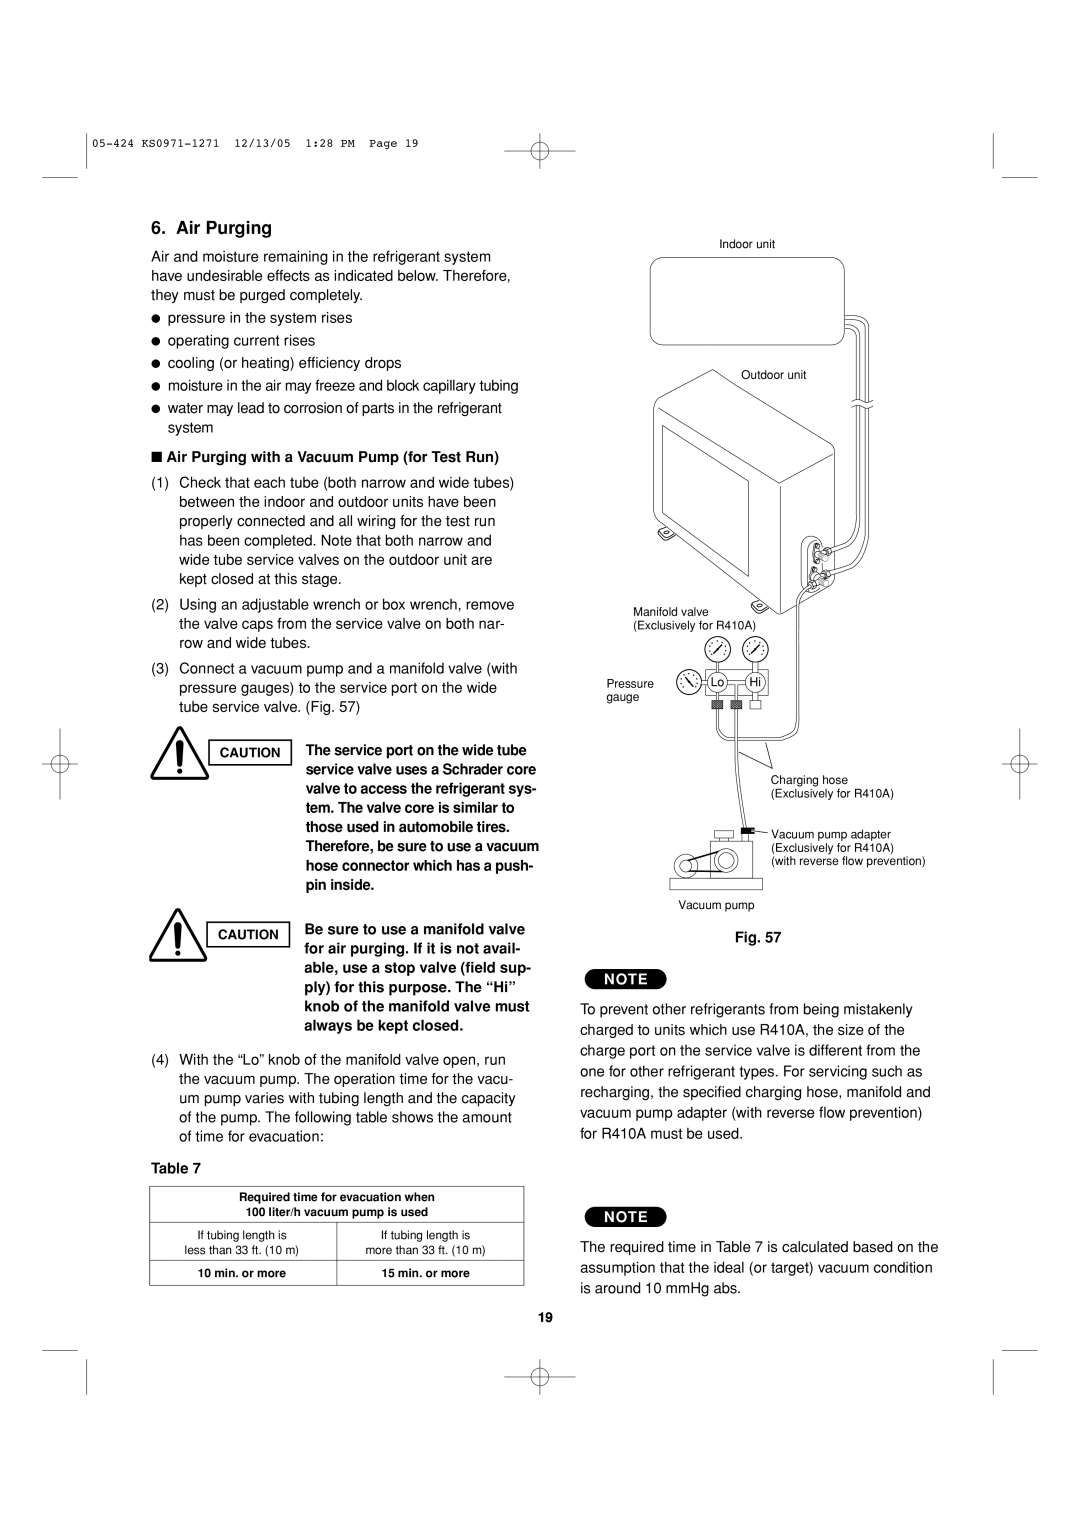 Sanyo Cool/Dry installation instructions Air Purging 